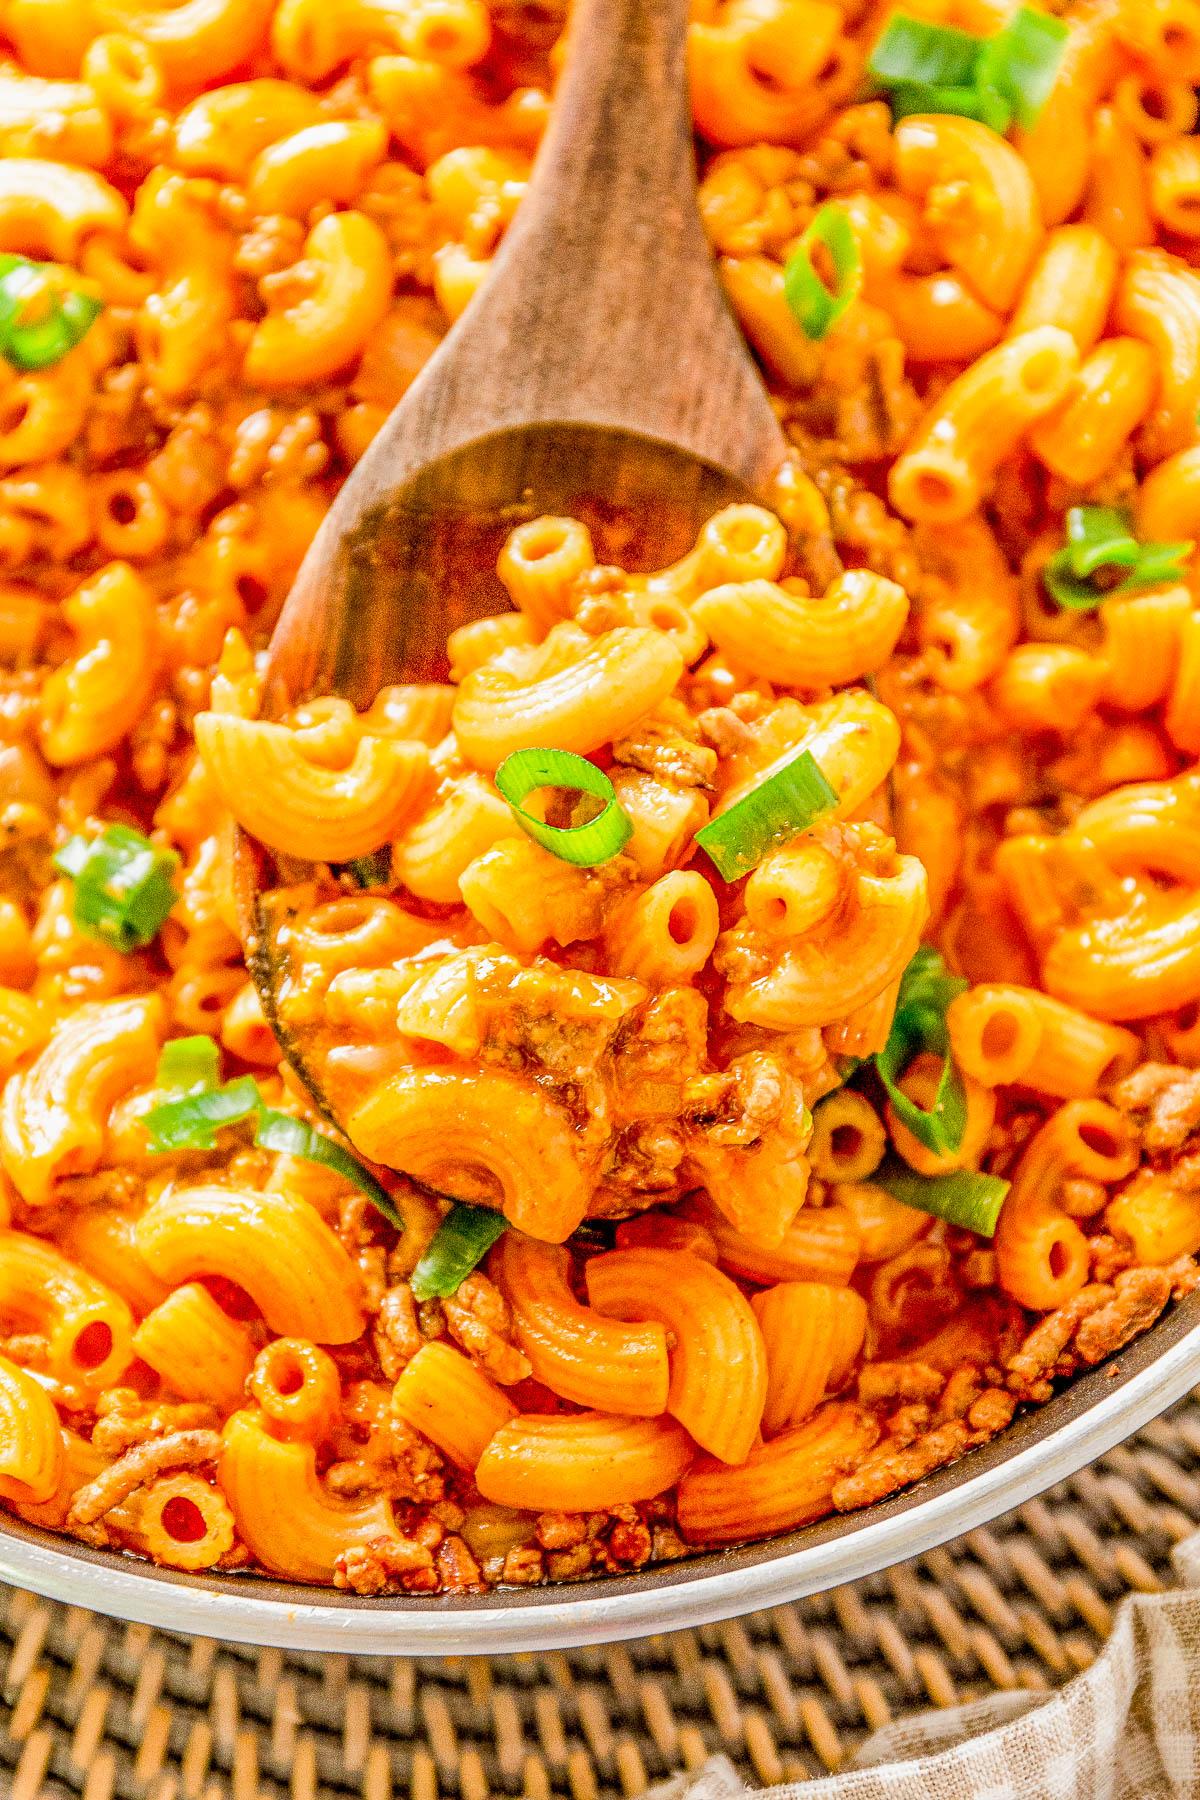 Homemade Hamburger Helper - You can kiss the store bought stuff goodbye because my homemade recipe for classic cheeseburger pasta is EASY, ready in 30 minutes, and made in ONE skillet! There's saucy cheesy pasta and juicy ground beef in every bite making this a family FAVORITE comfort food recipe. PERFECT for busy weeknights!